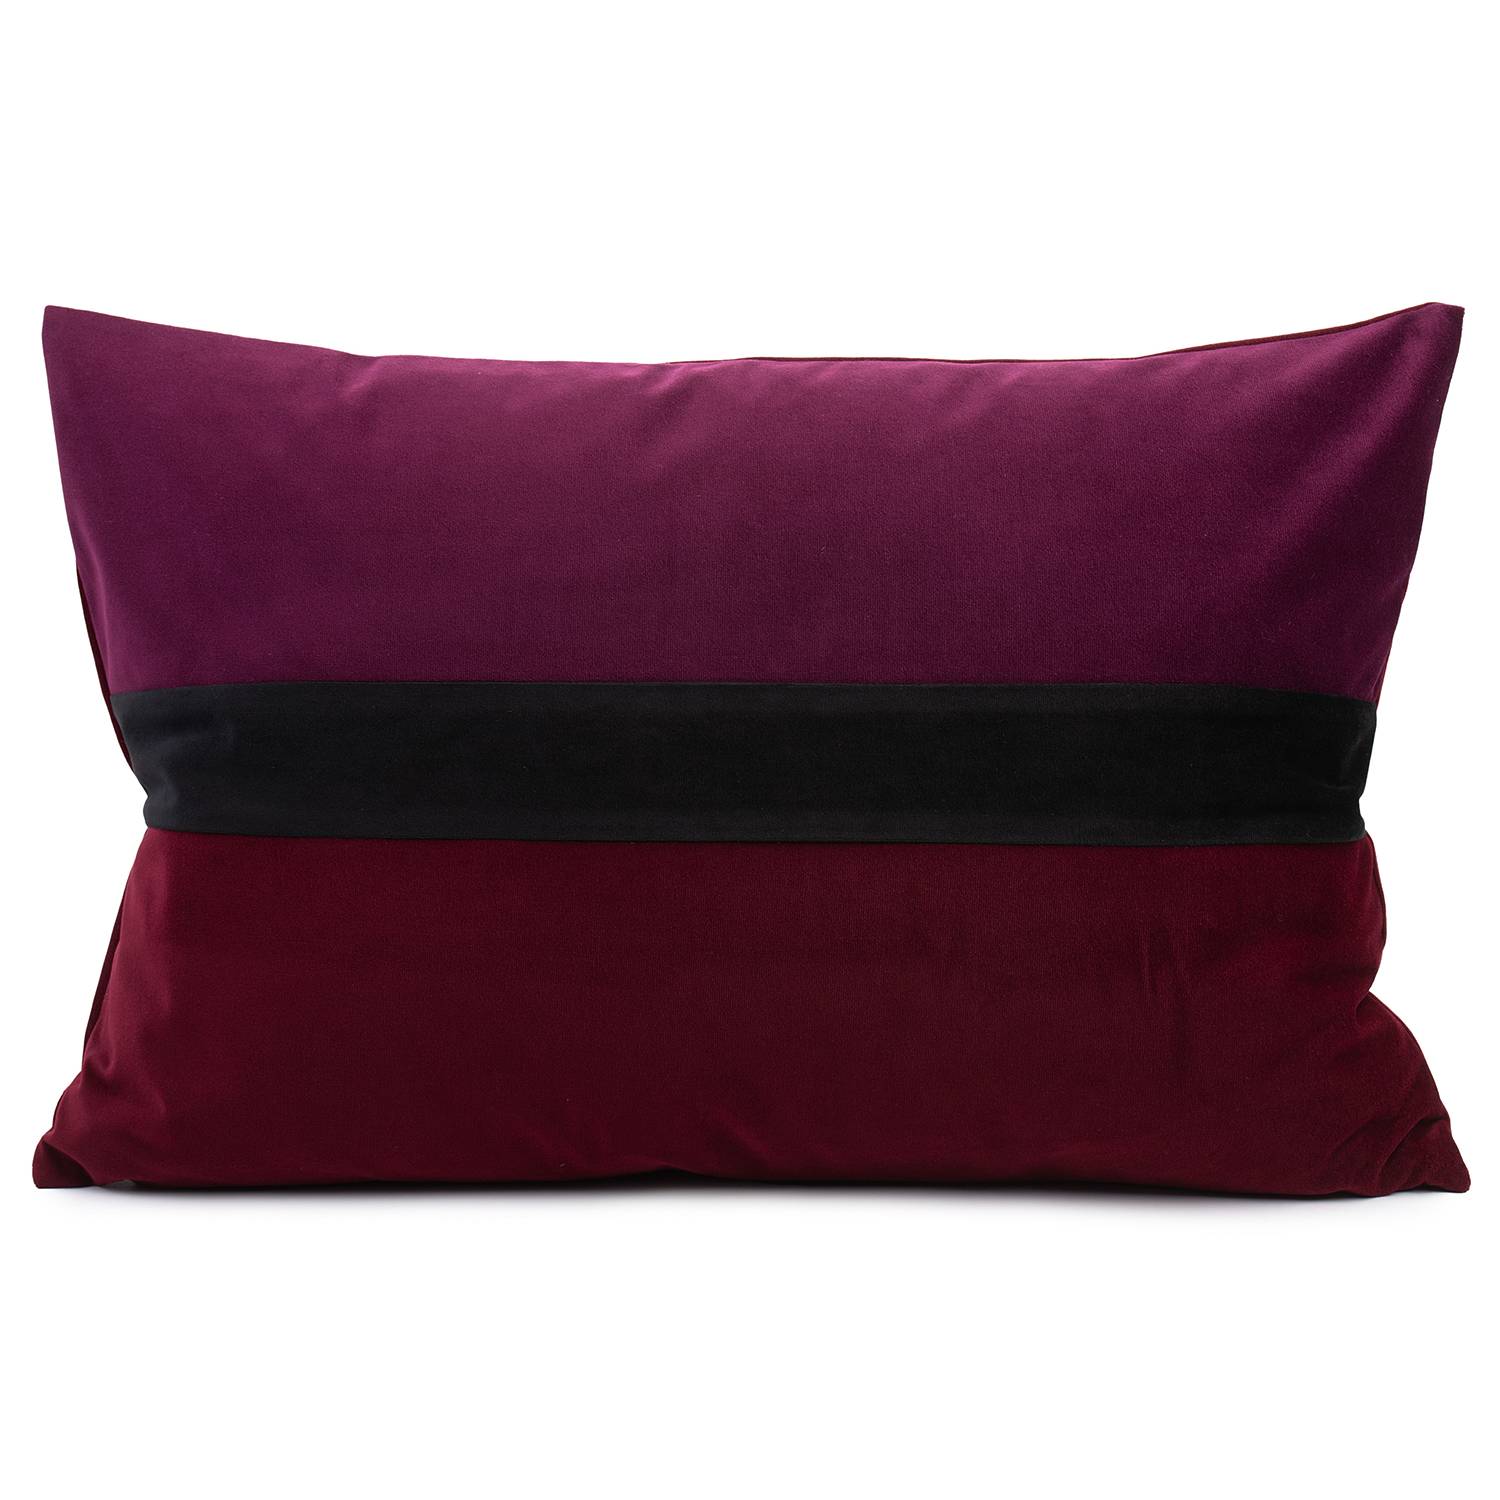 Image of Housse de coussin Pino 000000001000243548